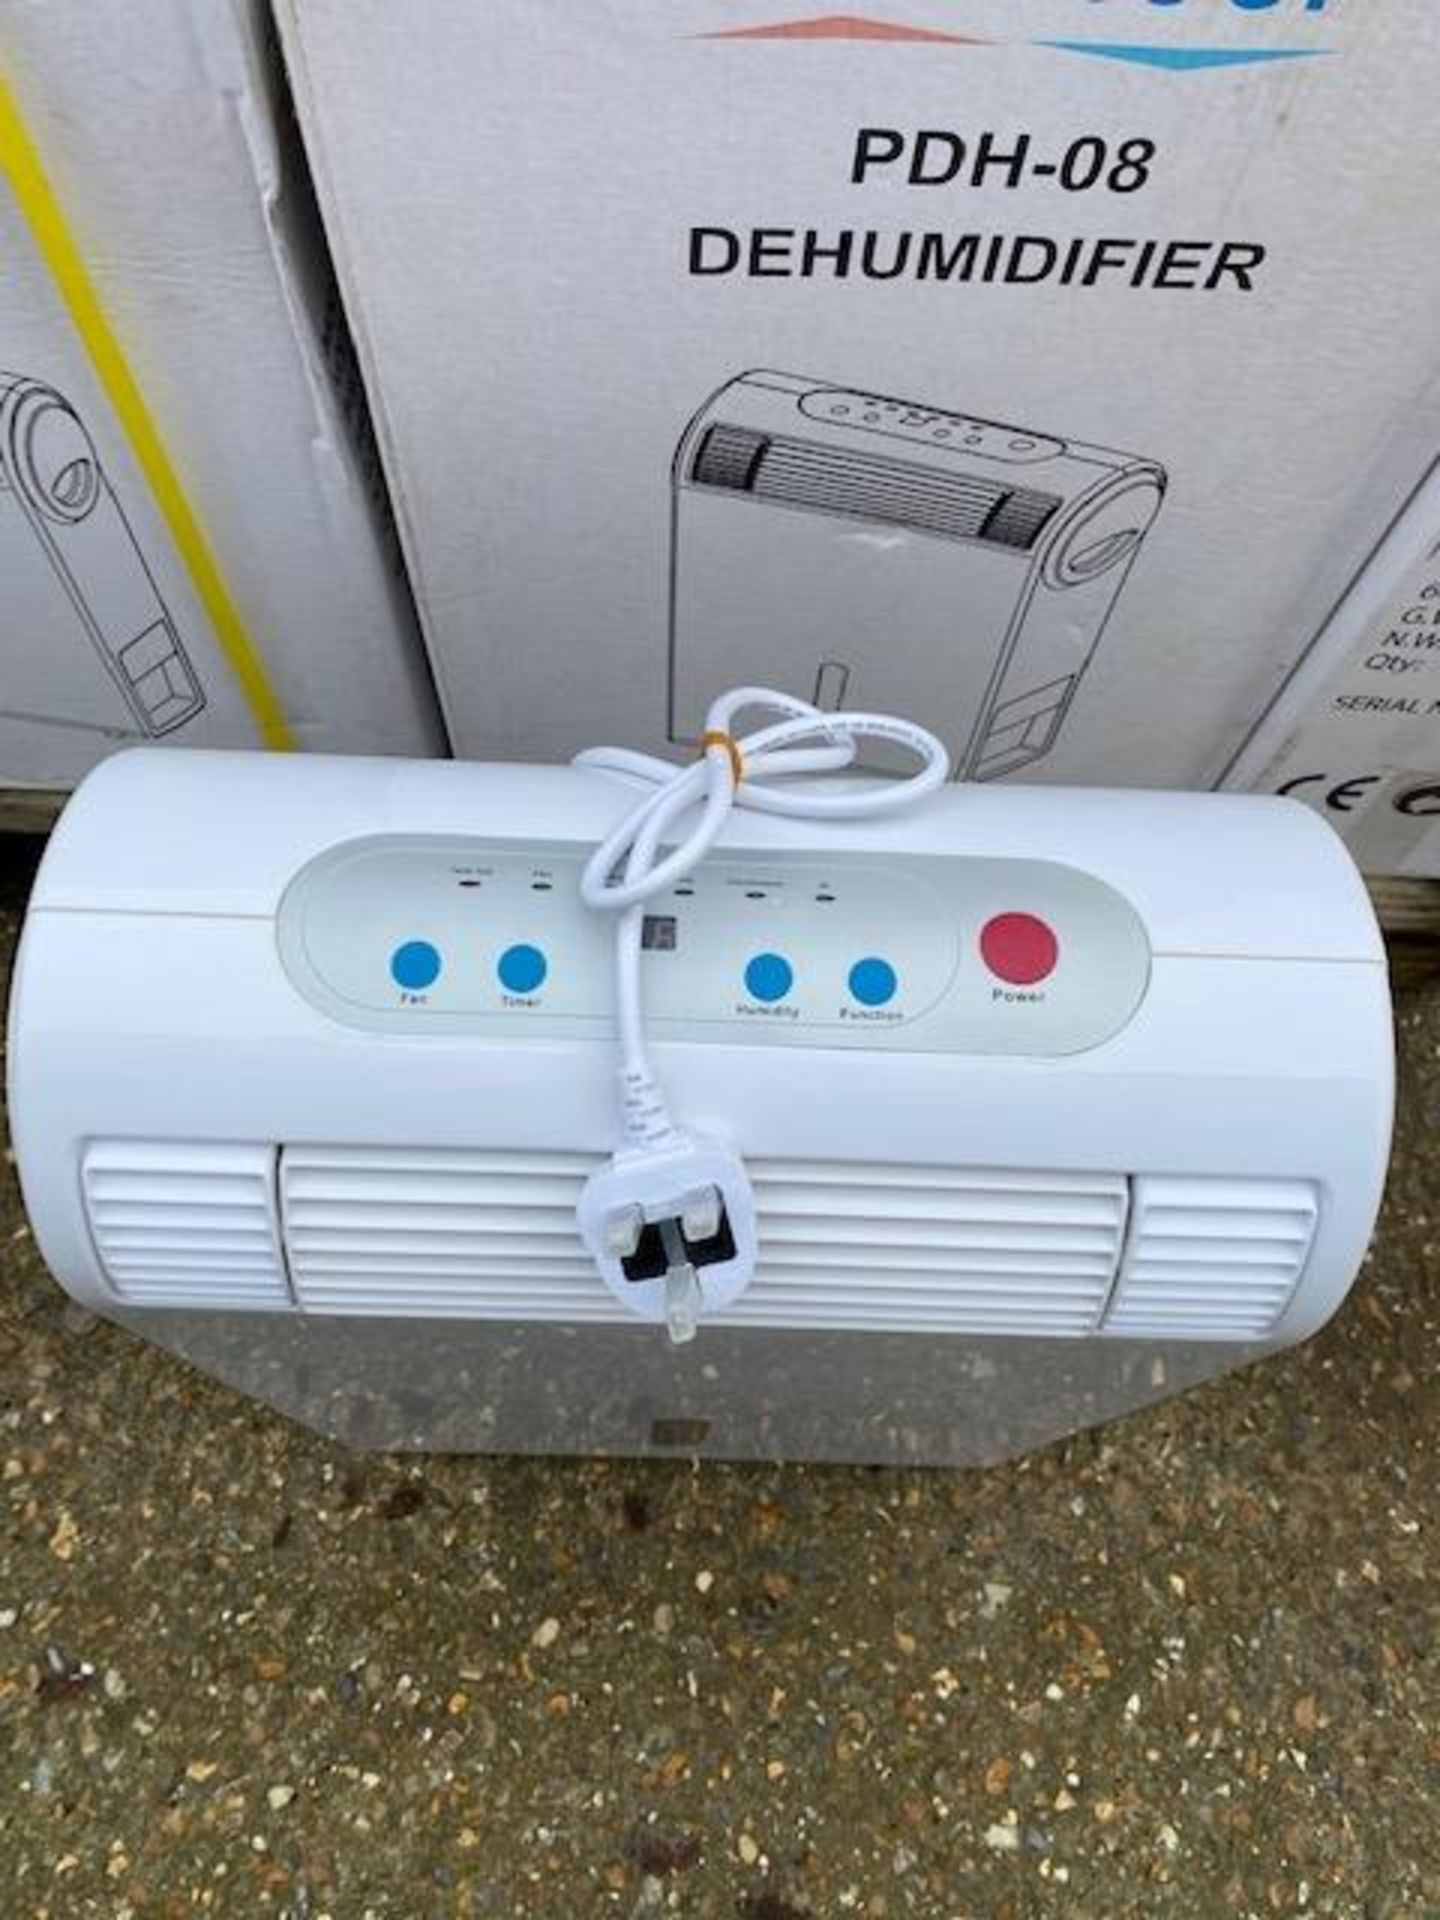 10x Servool PDH-08 Dehumidifiers, 220-240V, 50Hz - Image 2 of 12